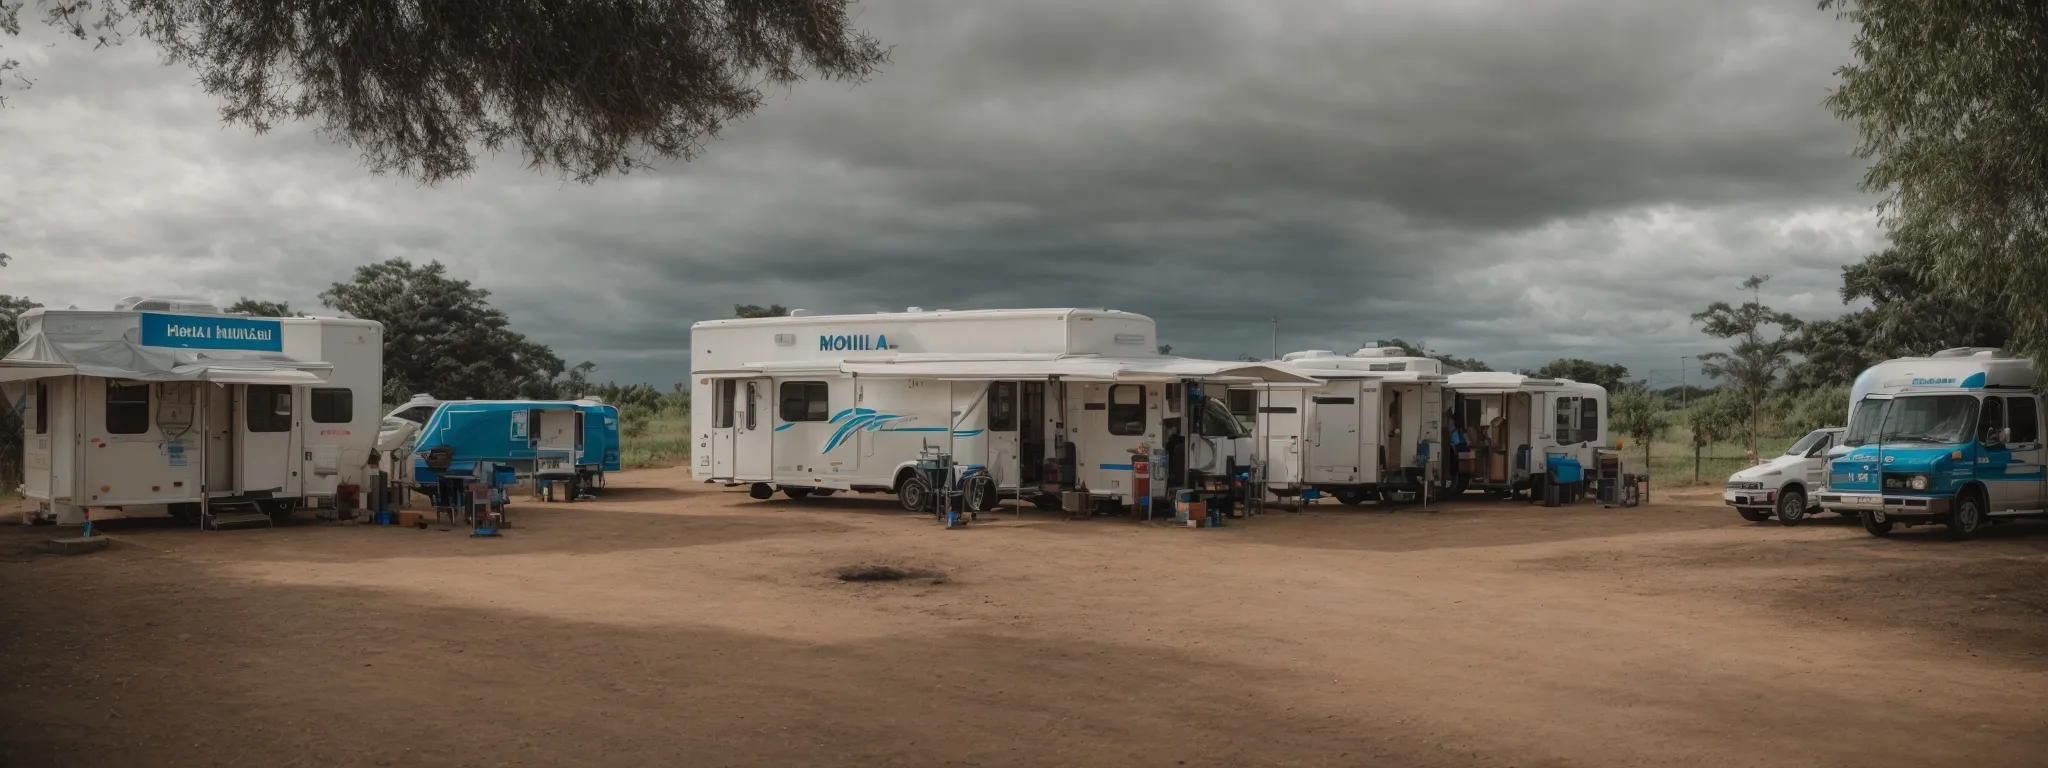 a mobile health clinic parks amidst a rural village, offering medical services to residents.